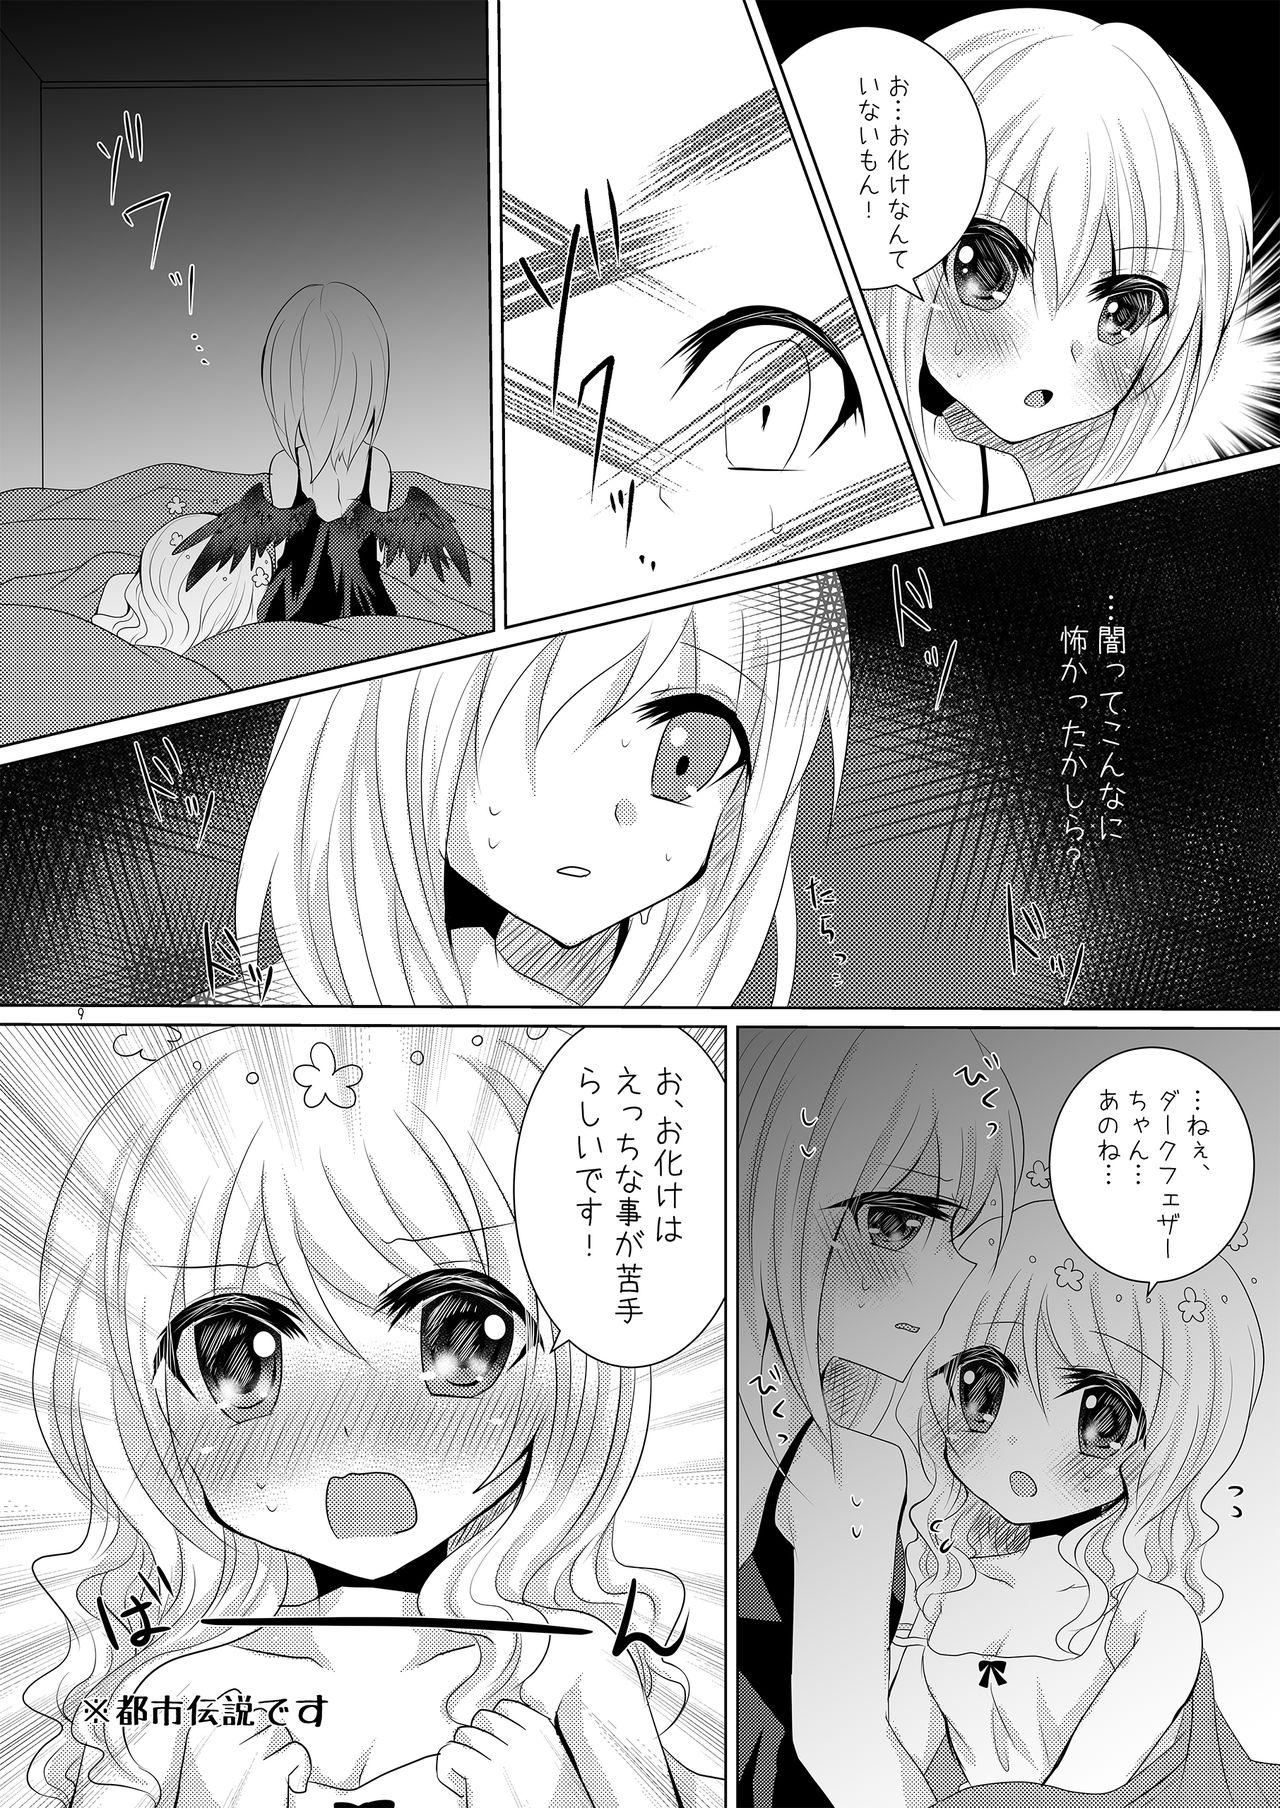 Special Locations Tenshi no Tawamure - Emil chronicle online Anime - Page 8